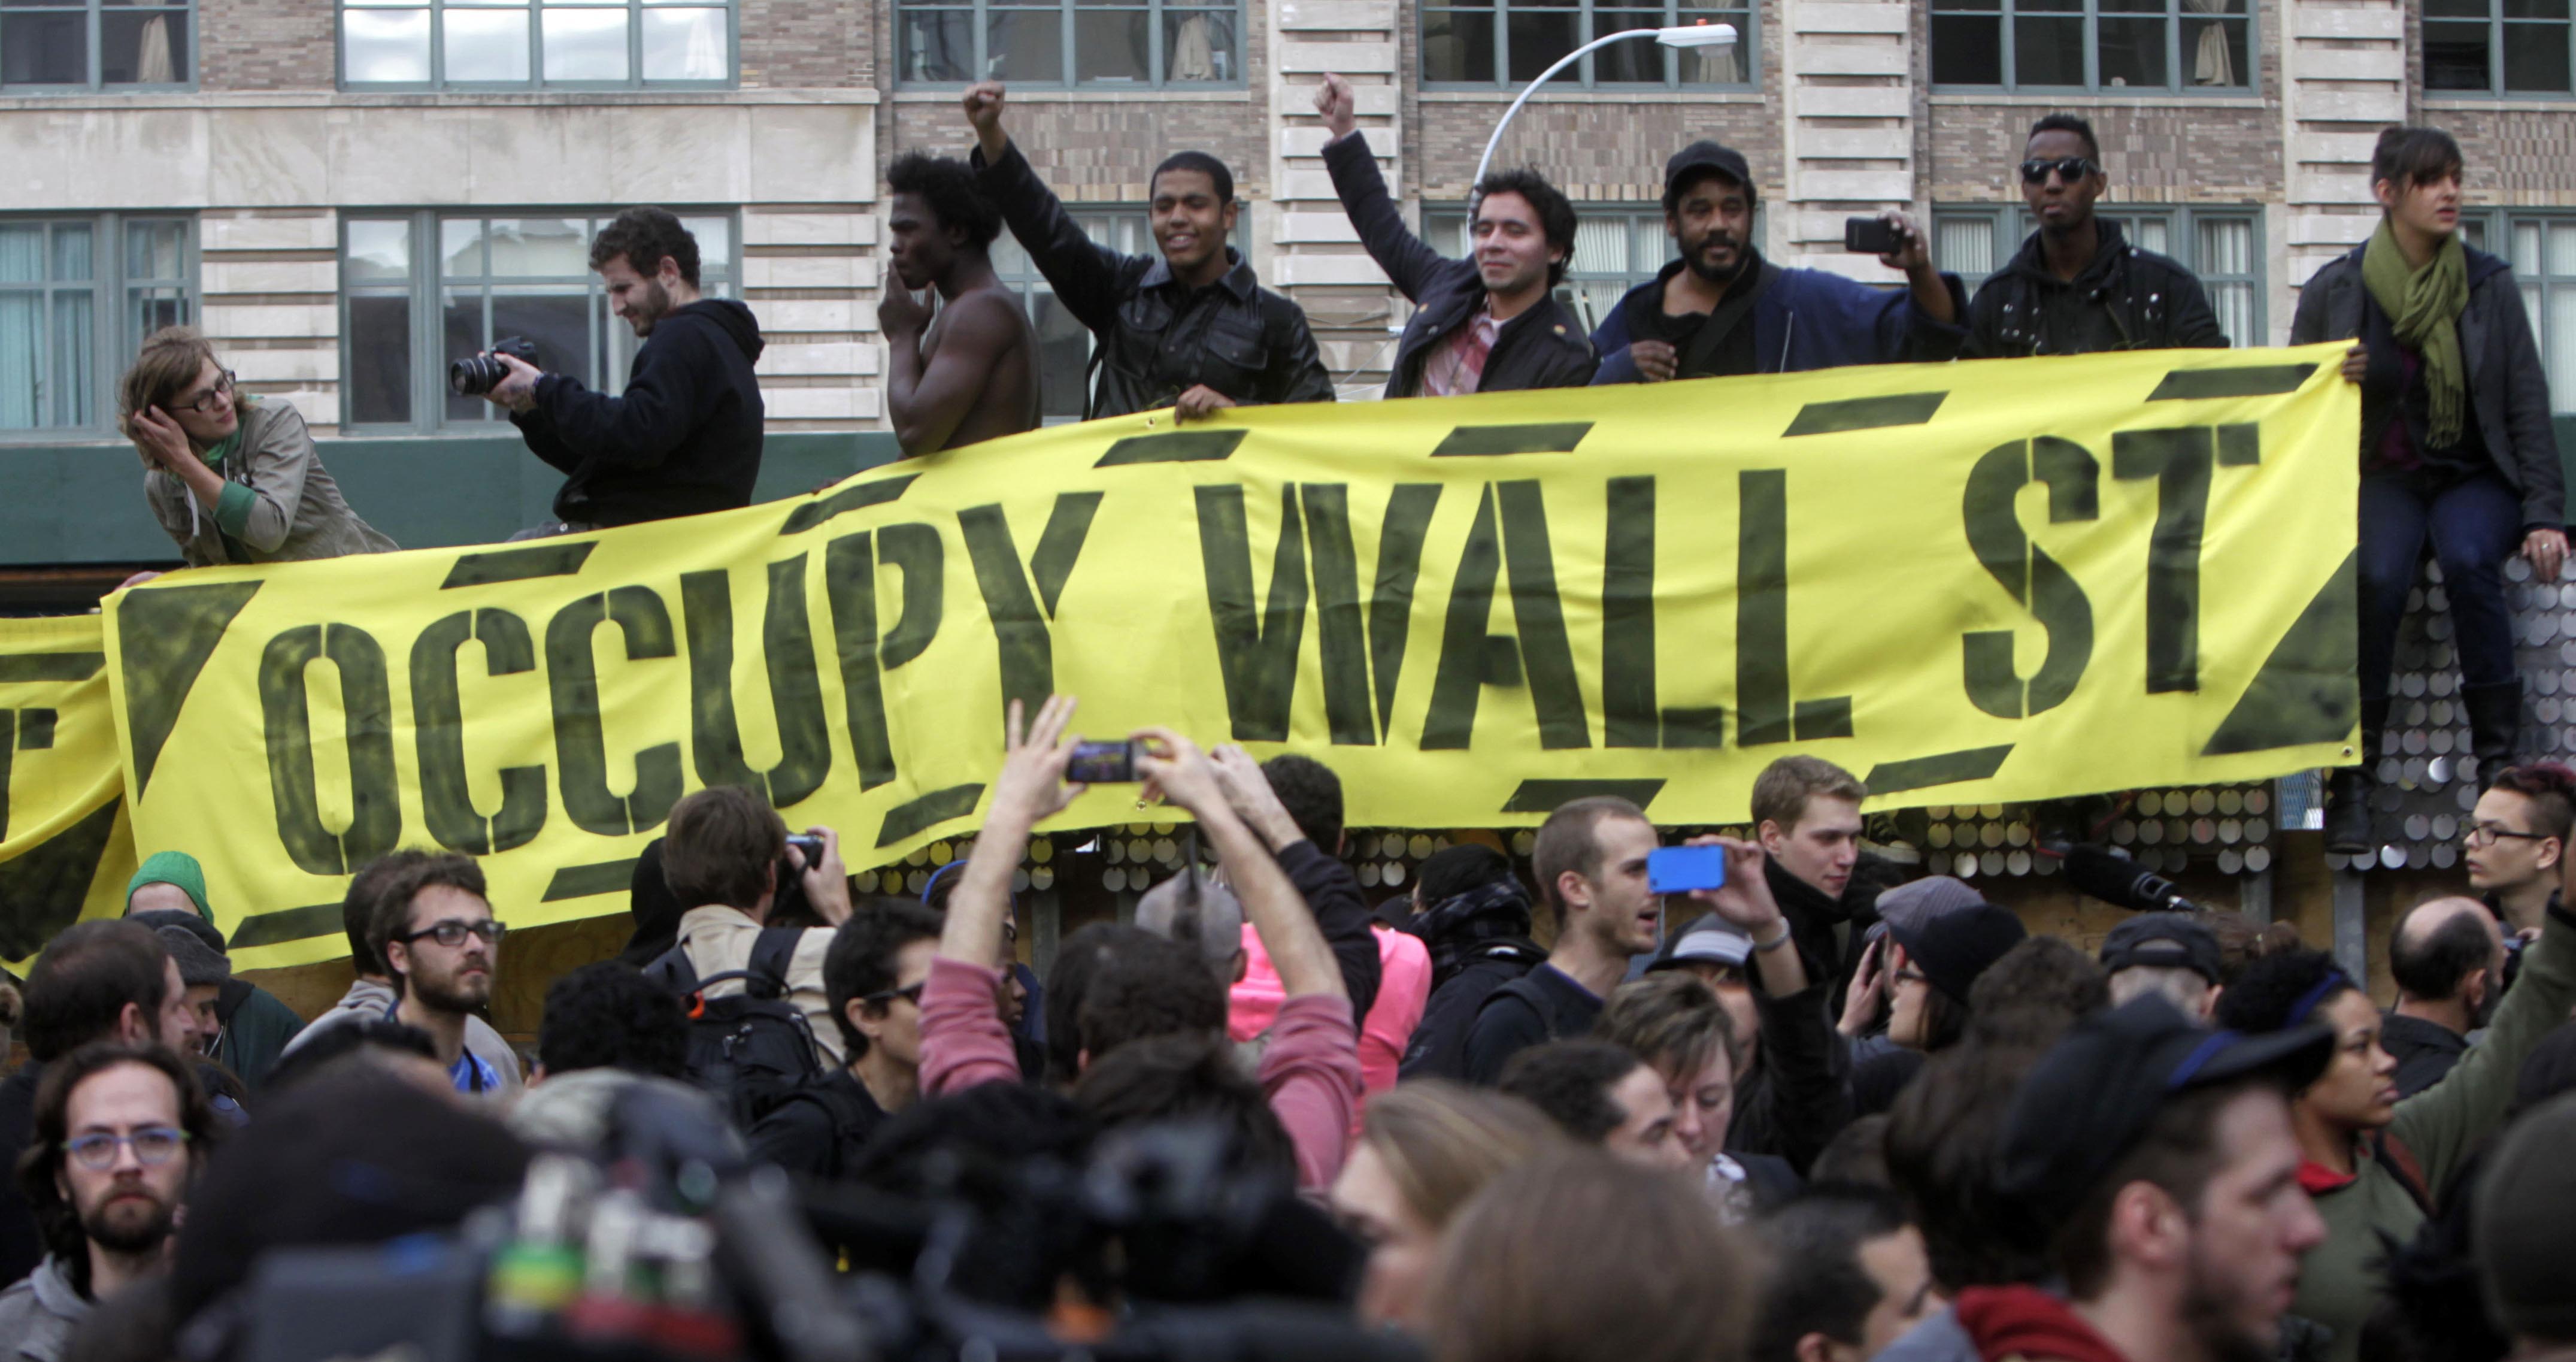 crowd-occupy-wall-st.